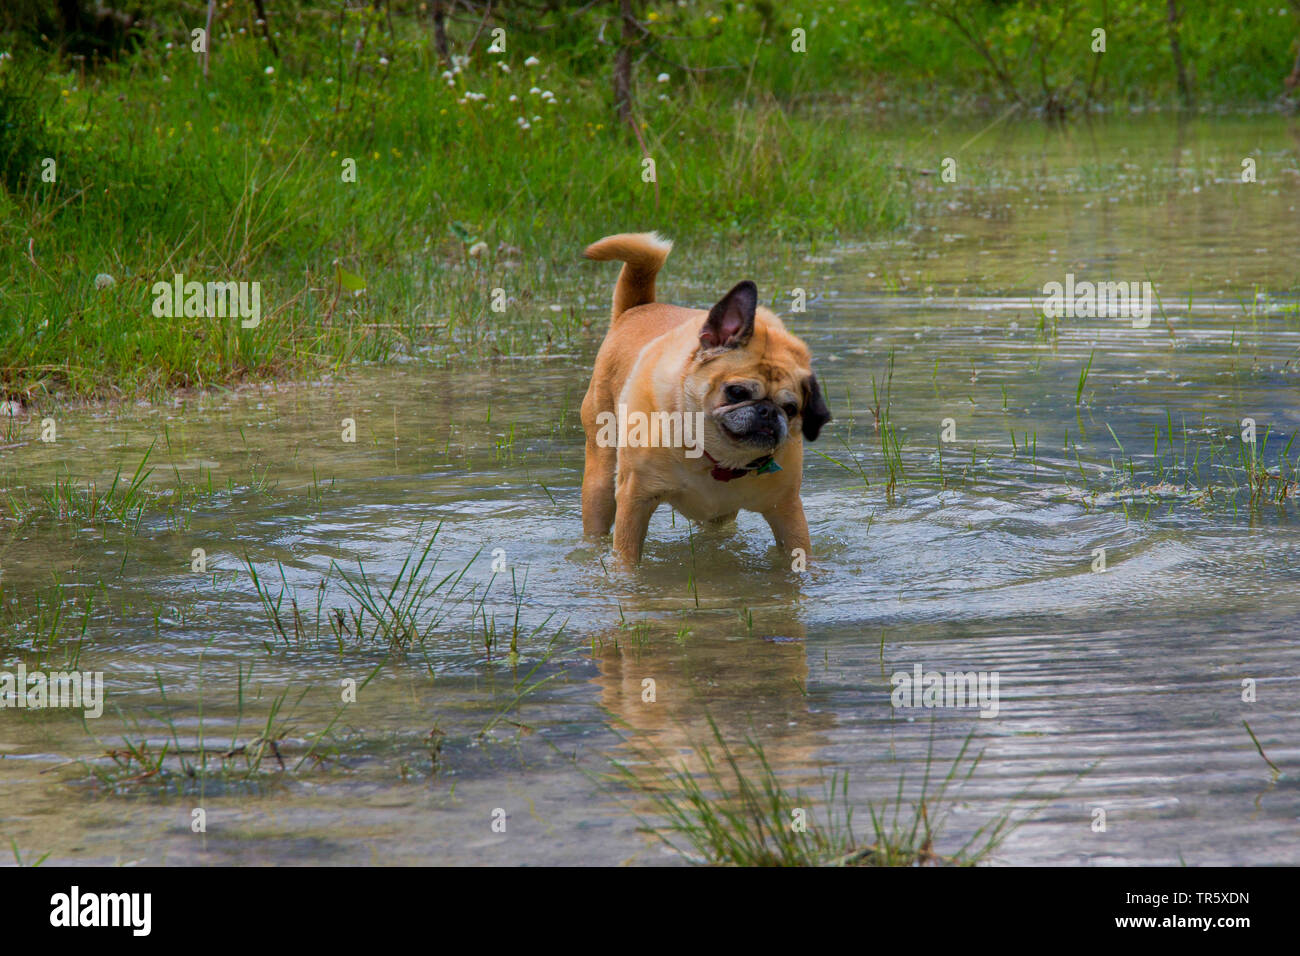 Pug (Canis lupus f. familiaris), old she-dog standing in shallow water, front view, Germany Stock Photo